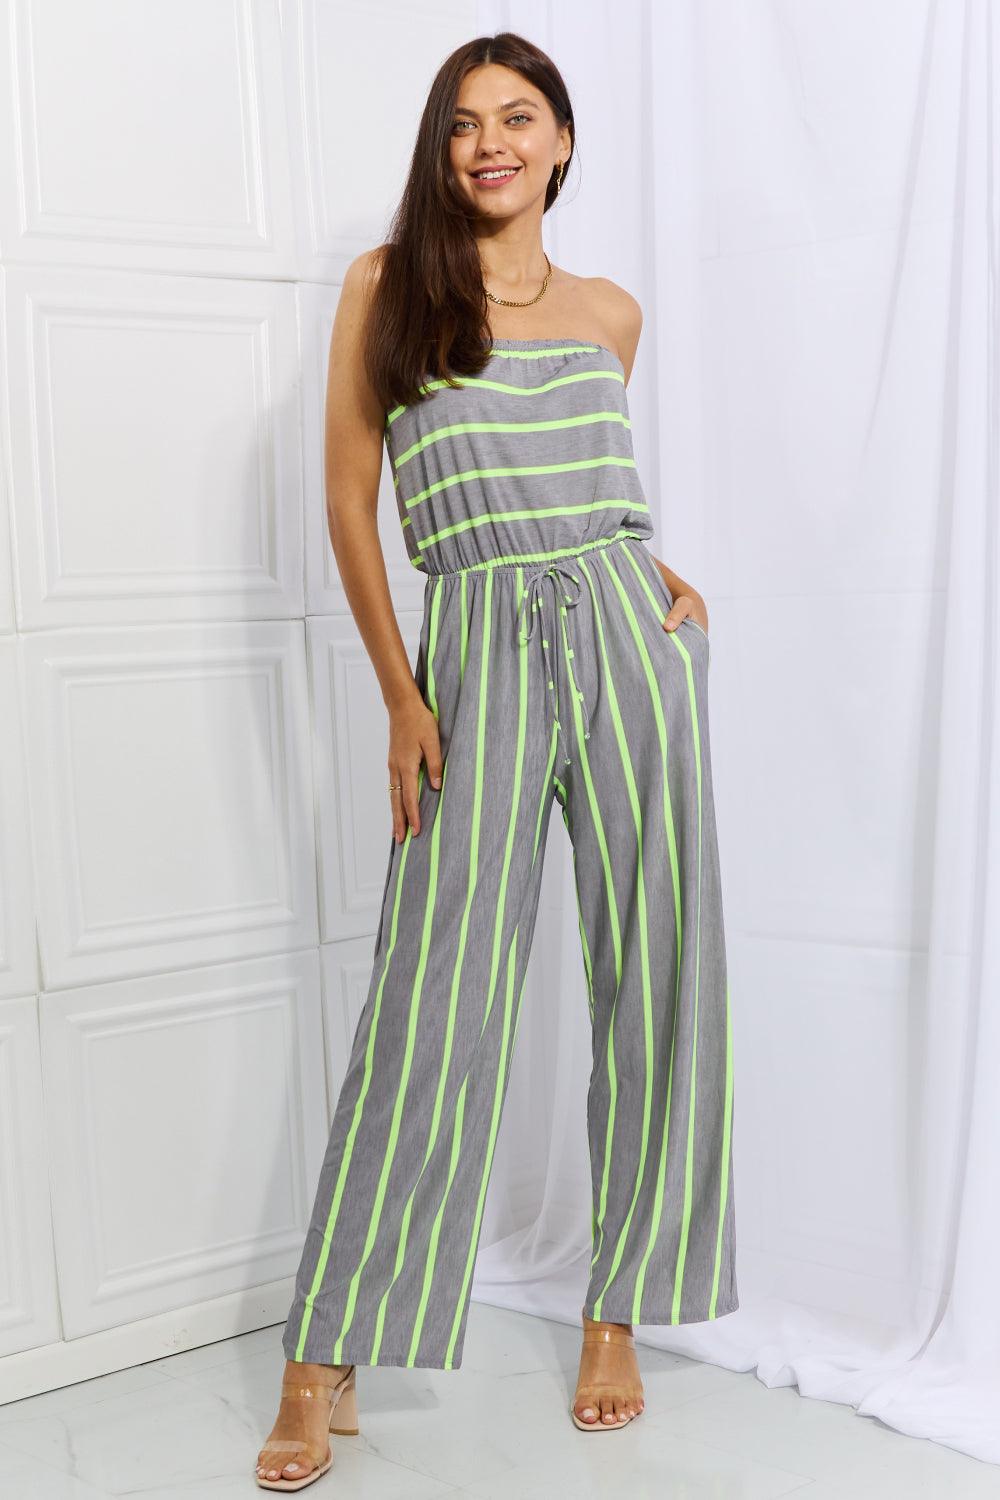 Sew In Love Pop Of Color Full Size Sleeveless Striped Jumpsuit - AMIClubwear